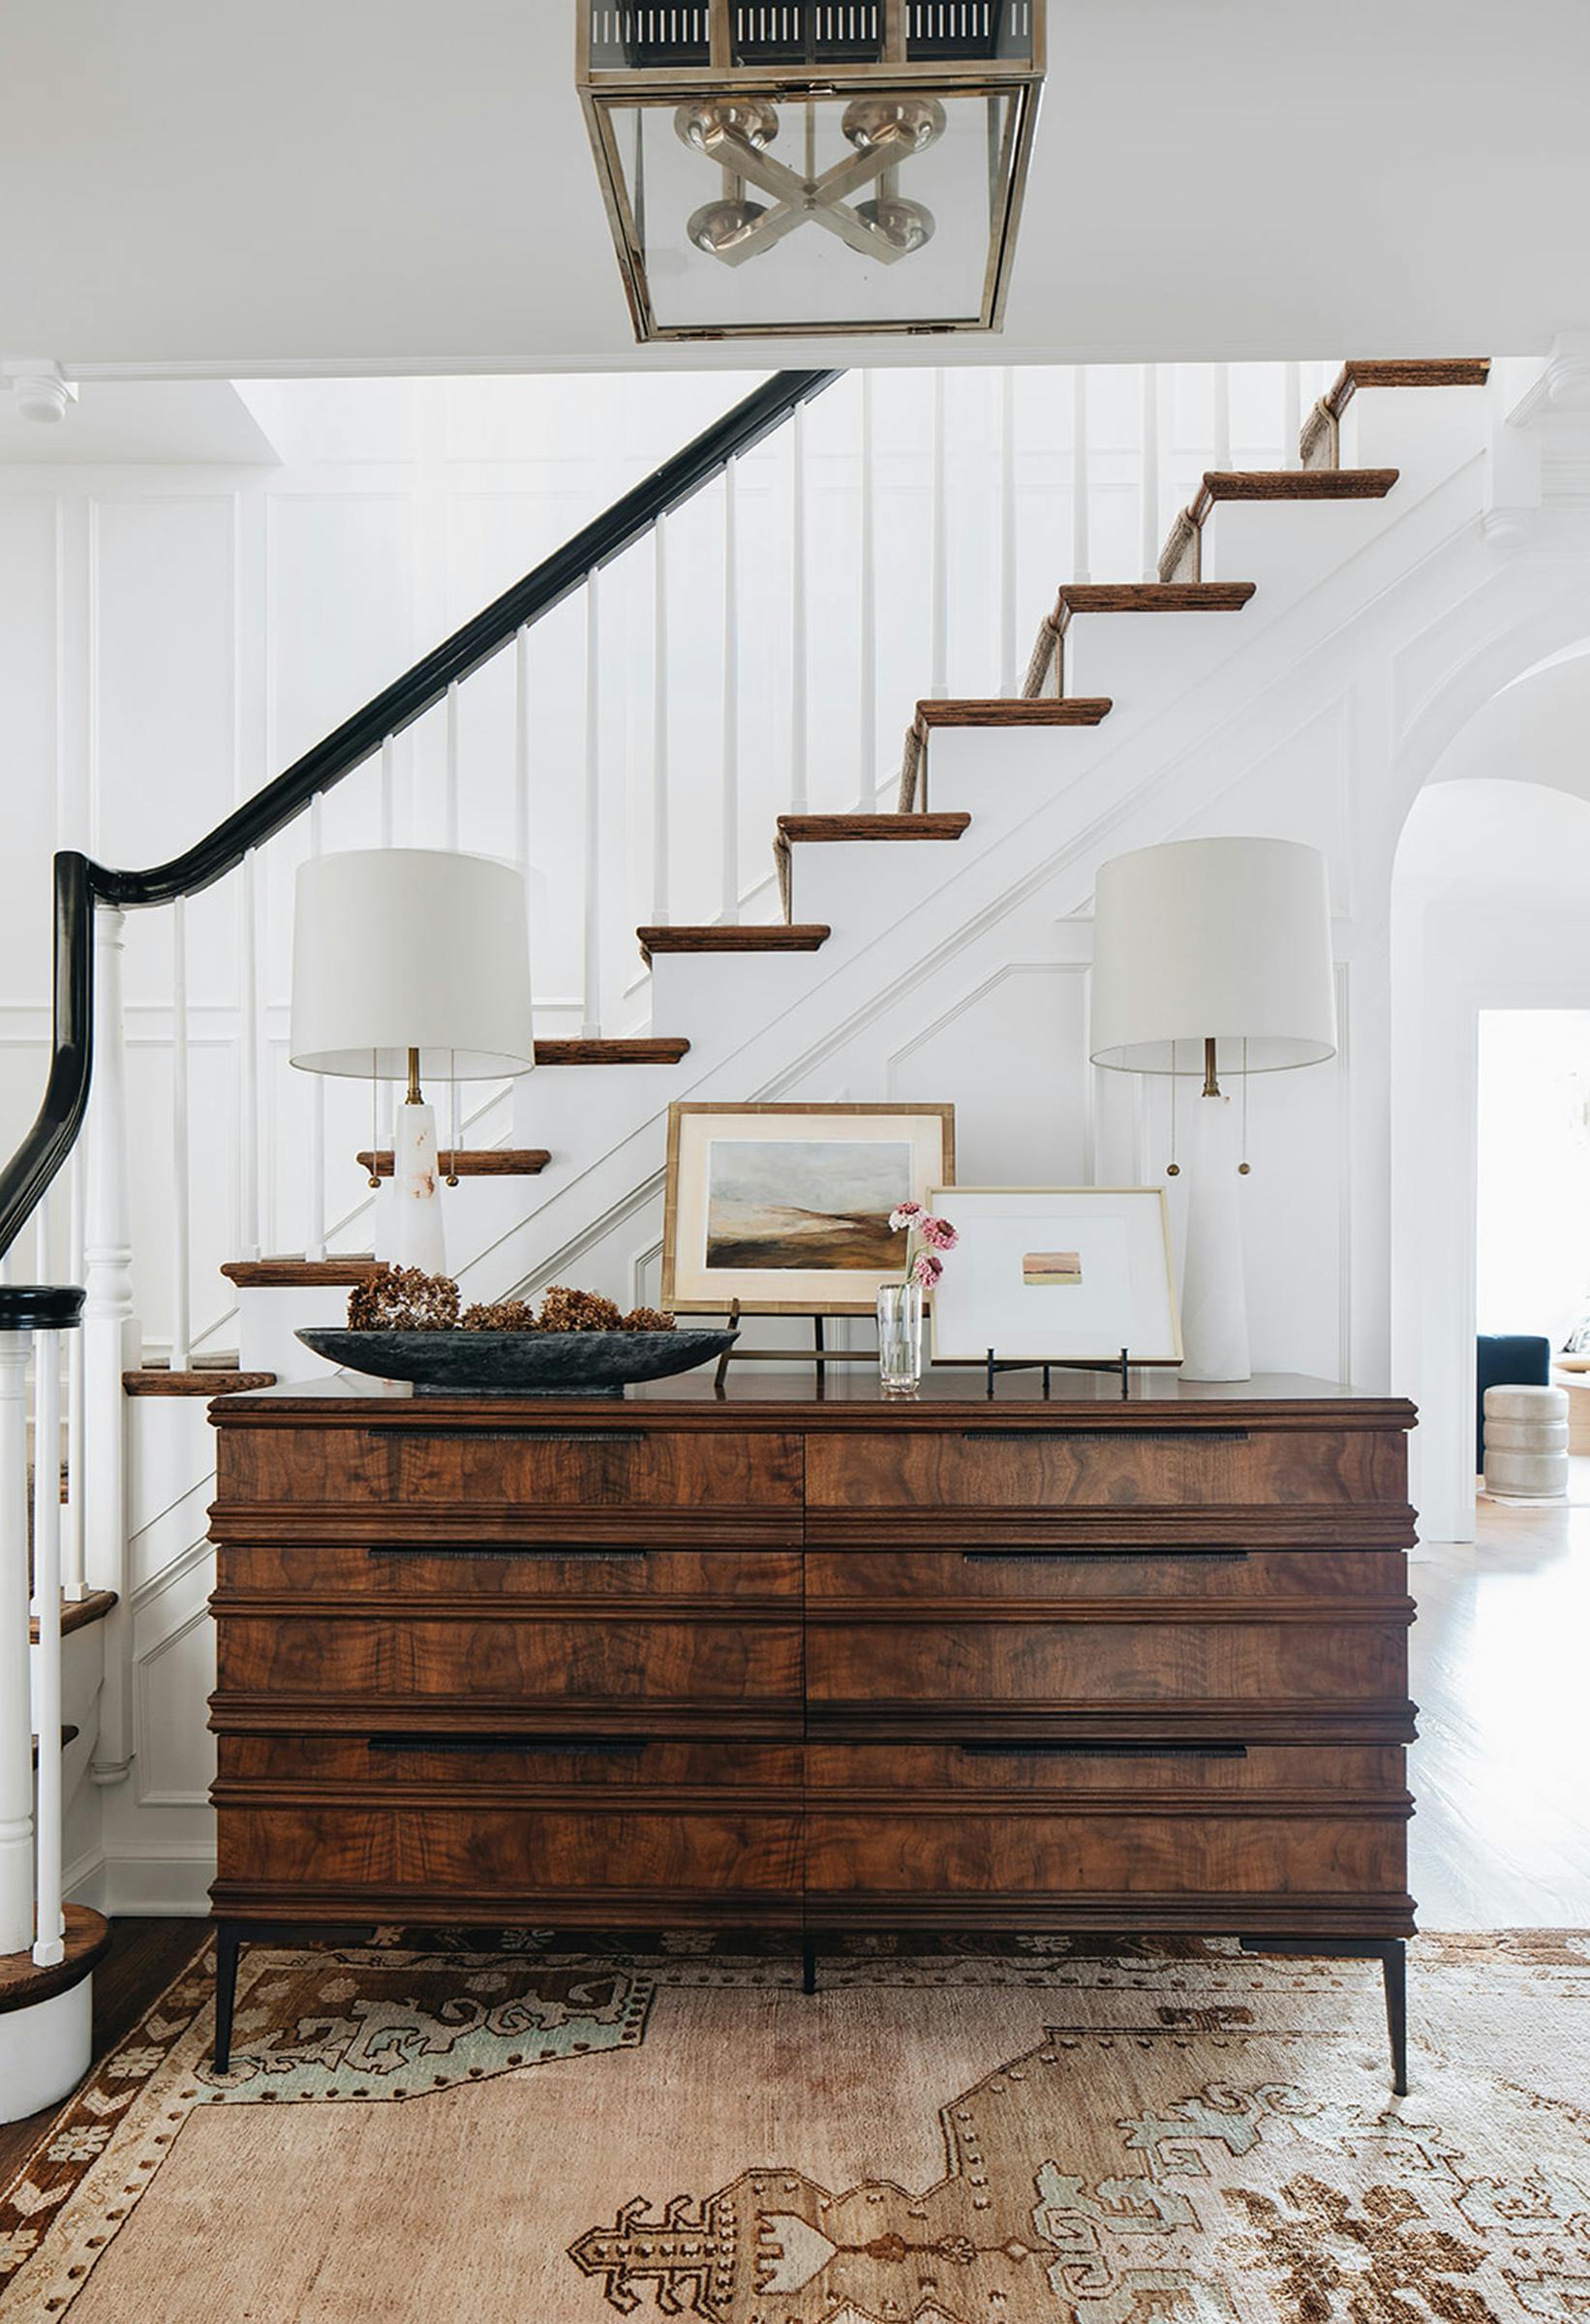 Nicole-Green-Design-Project-Chevy-Chase-Historic-East-Coast-Home-Stairway